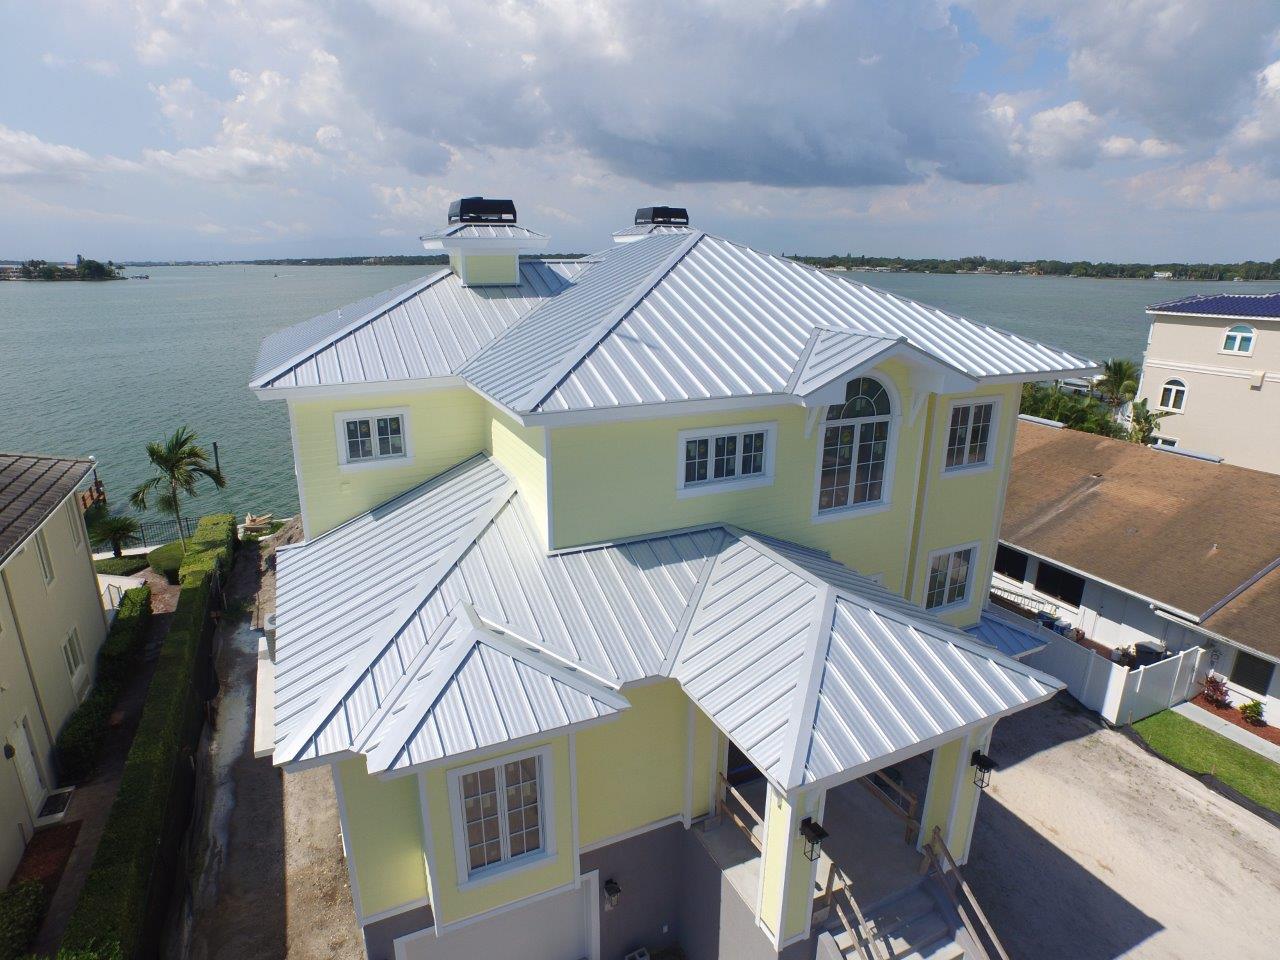 Metal roofs are becoming particularly popular in areas hard hit by extreme climate conditions. Photo courtesy of MRA member Drexel Metals